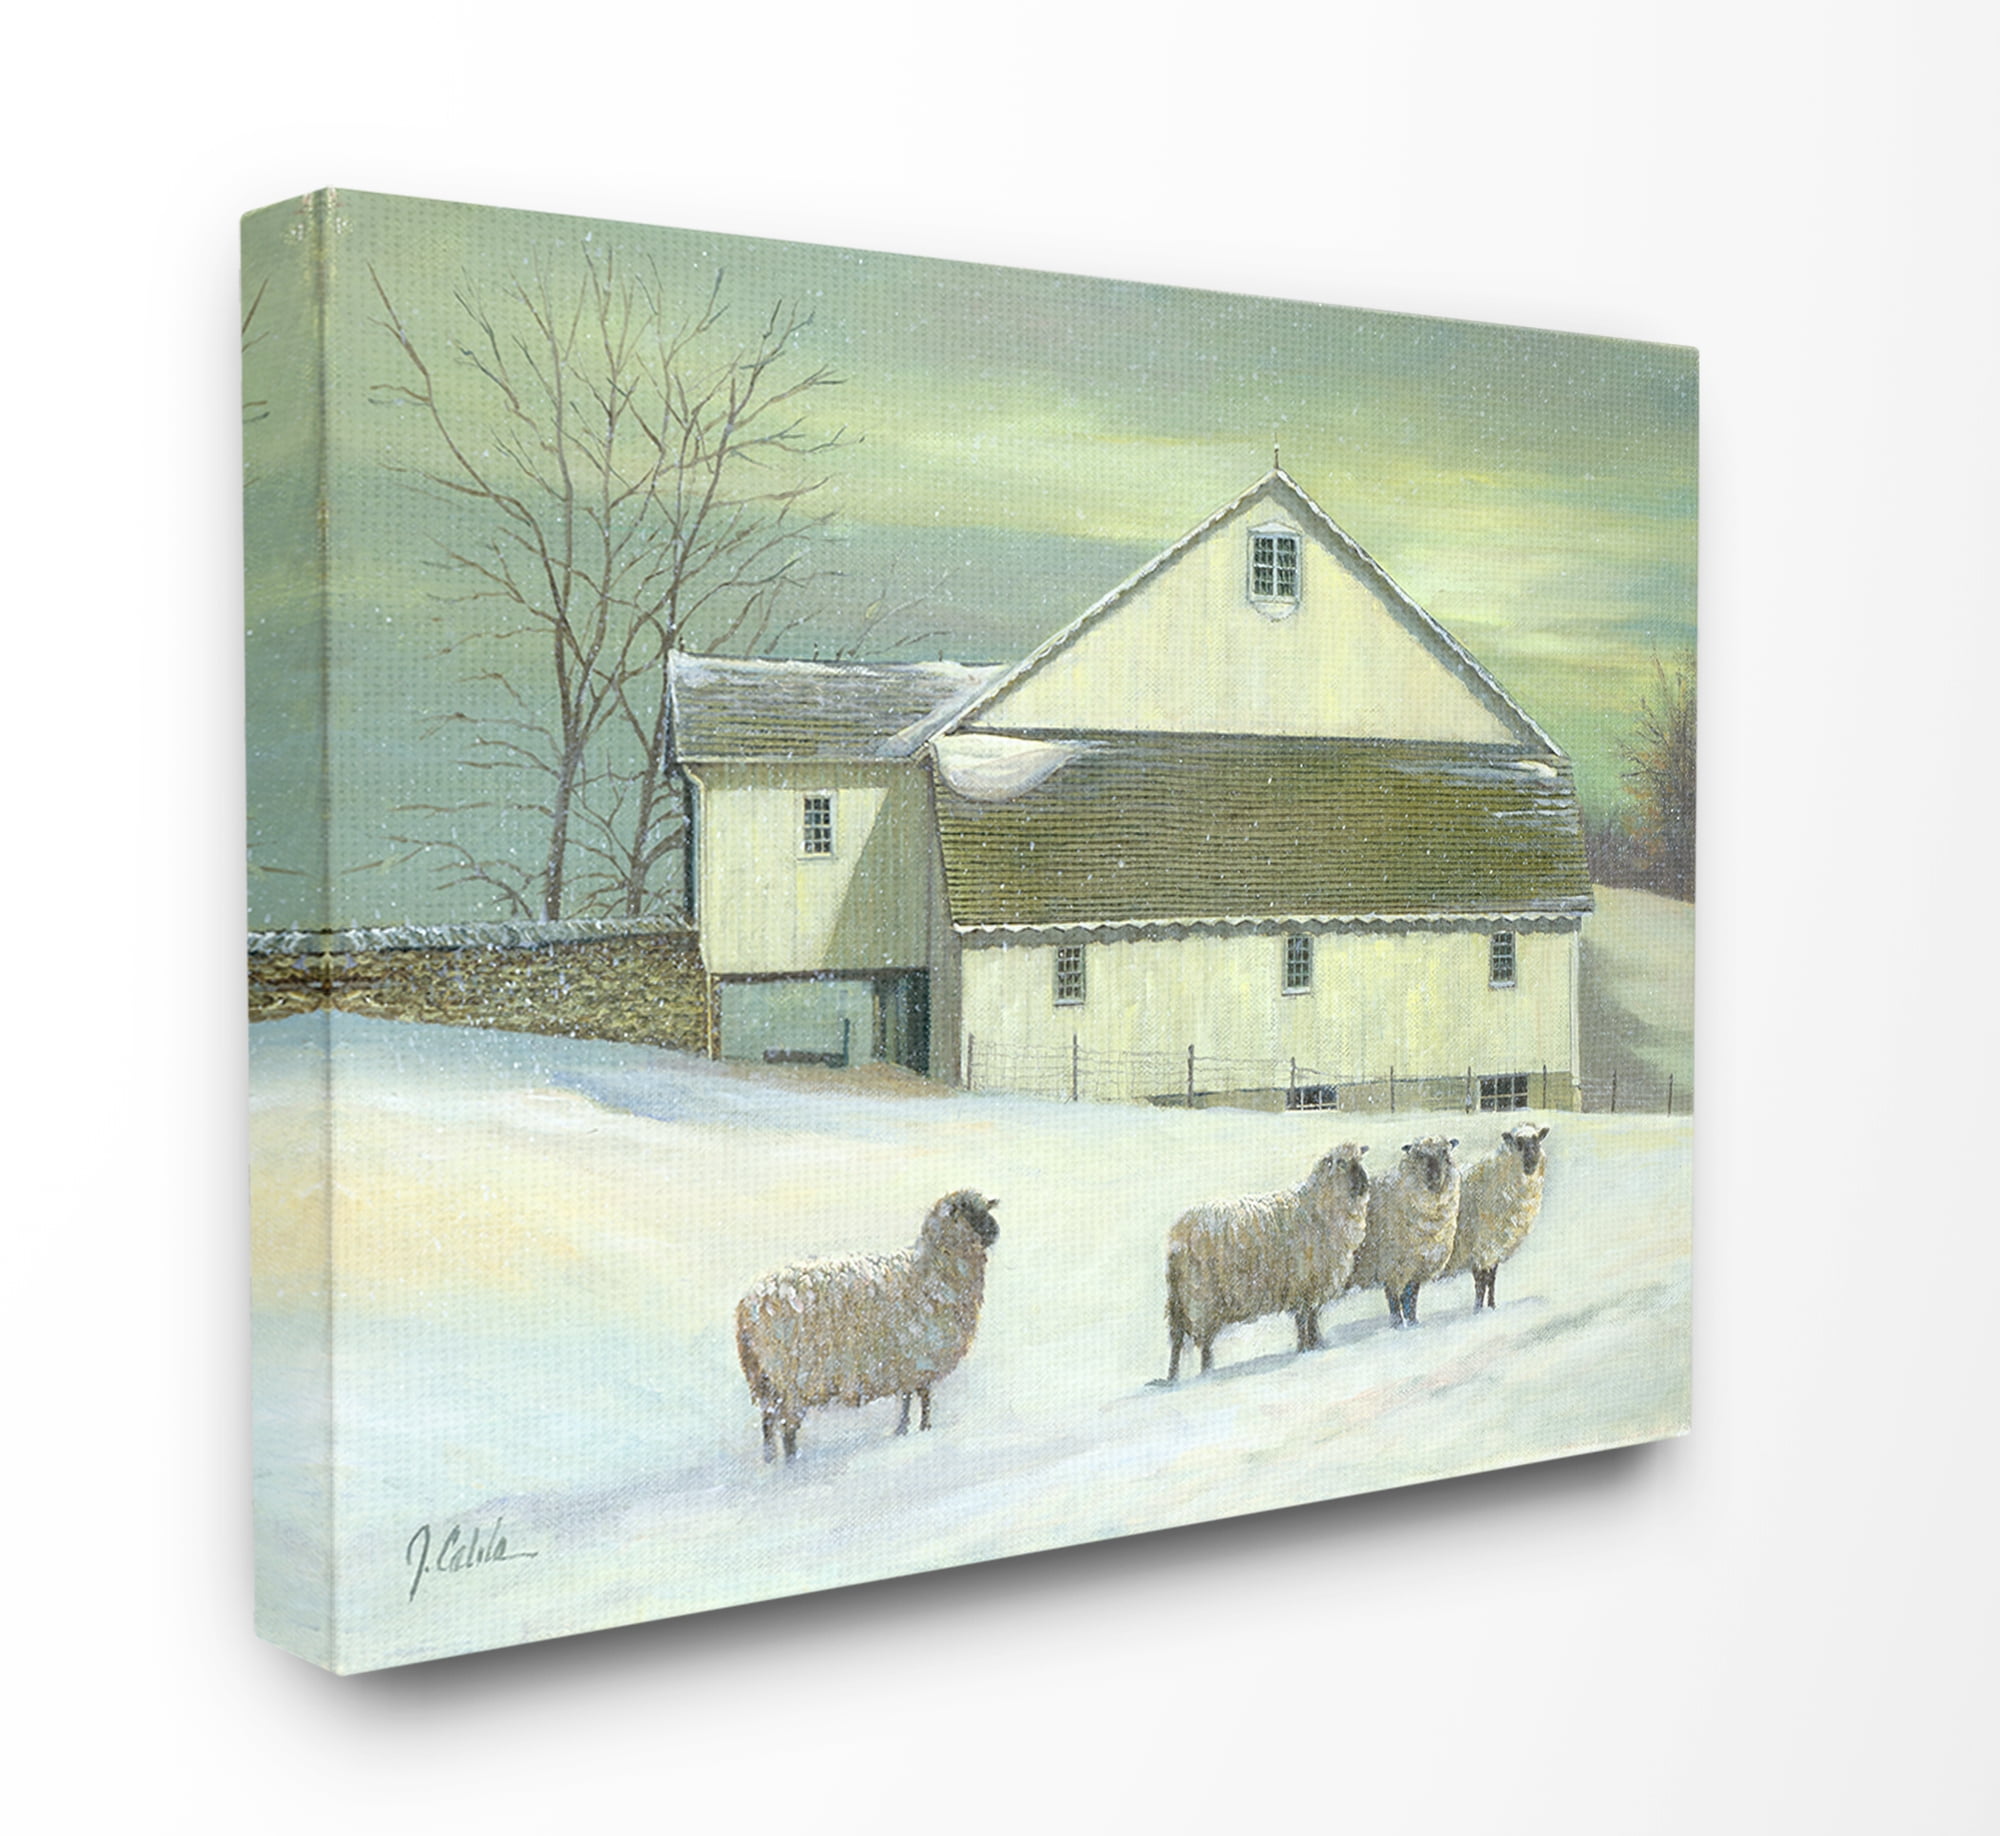 Multi-Color The Stupell Home Decor Sheep in Front of The Farmhouse Green Toned Painting Framed Giclee Texturized Art 